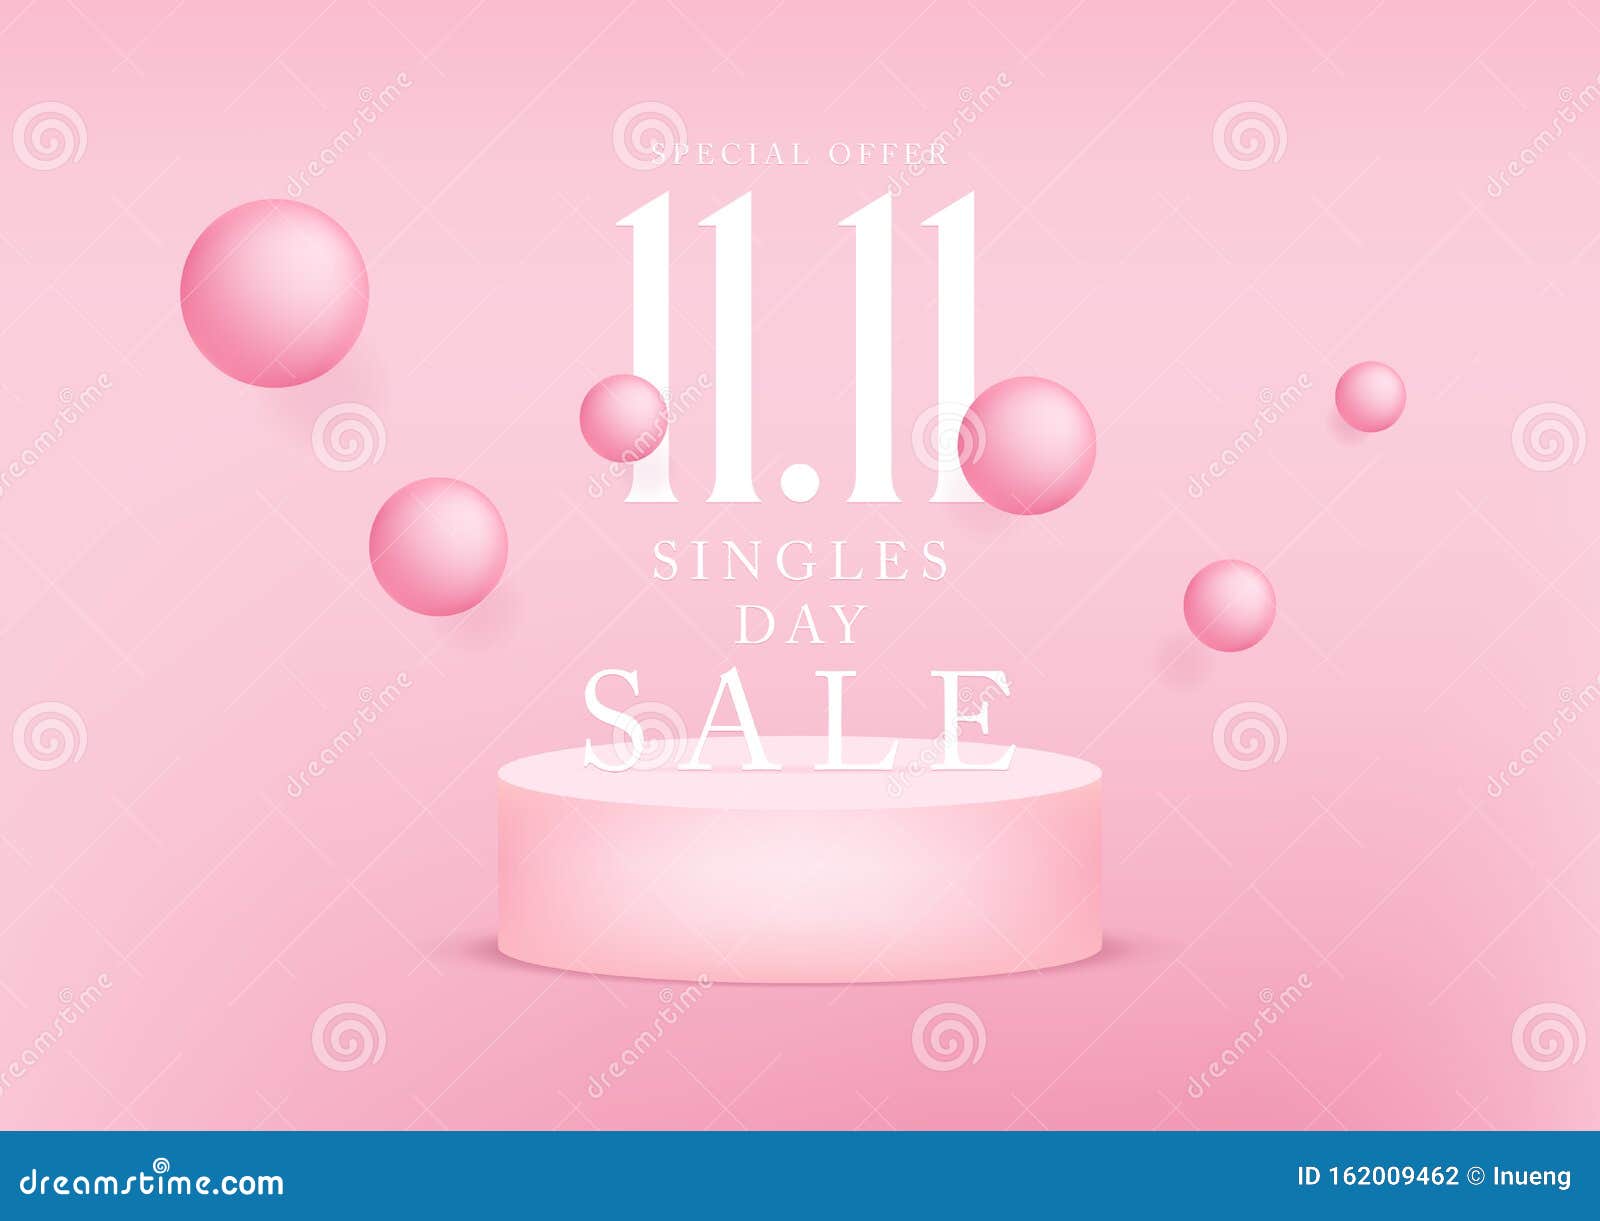 11.11 singles day sale banner.